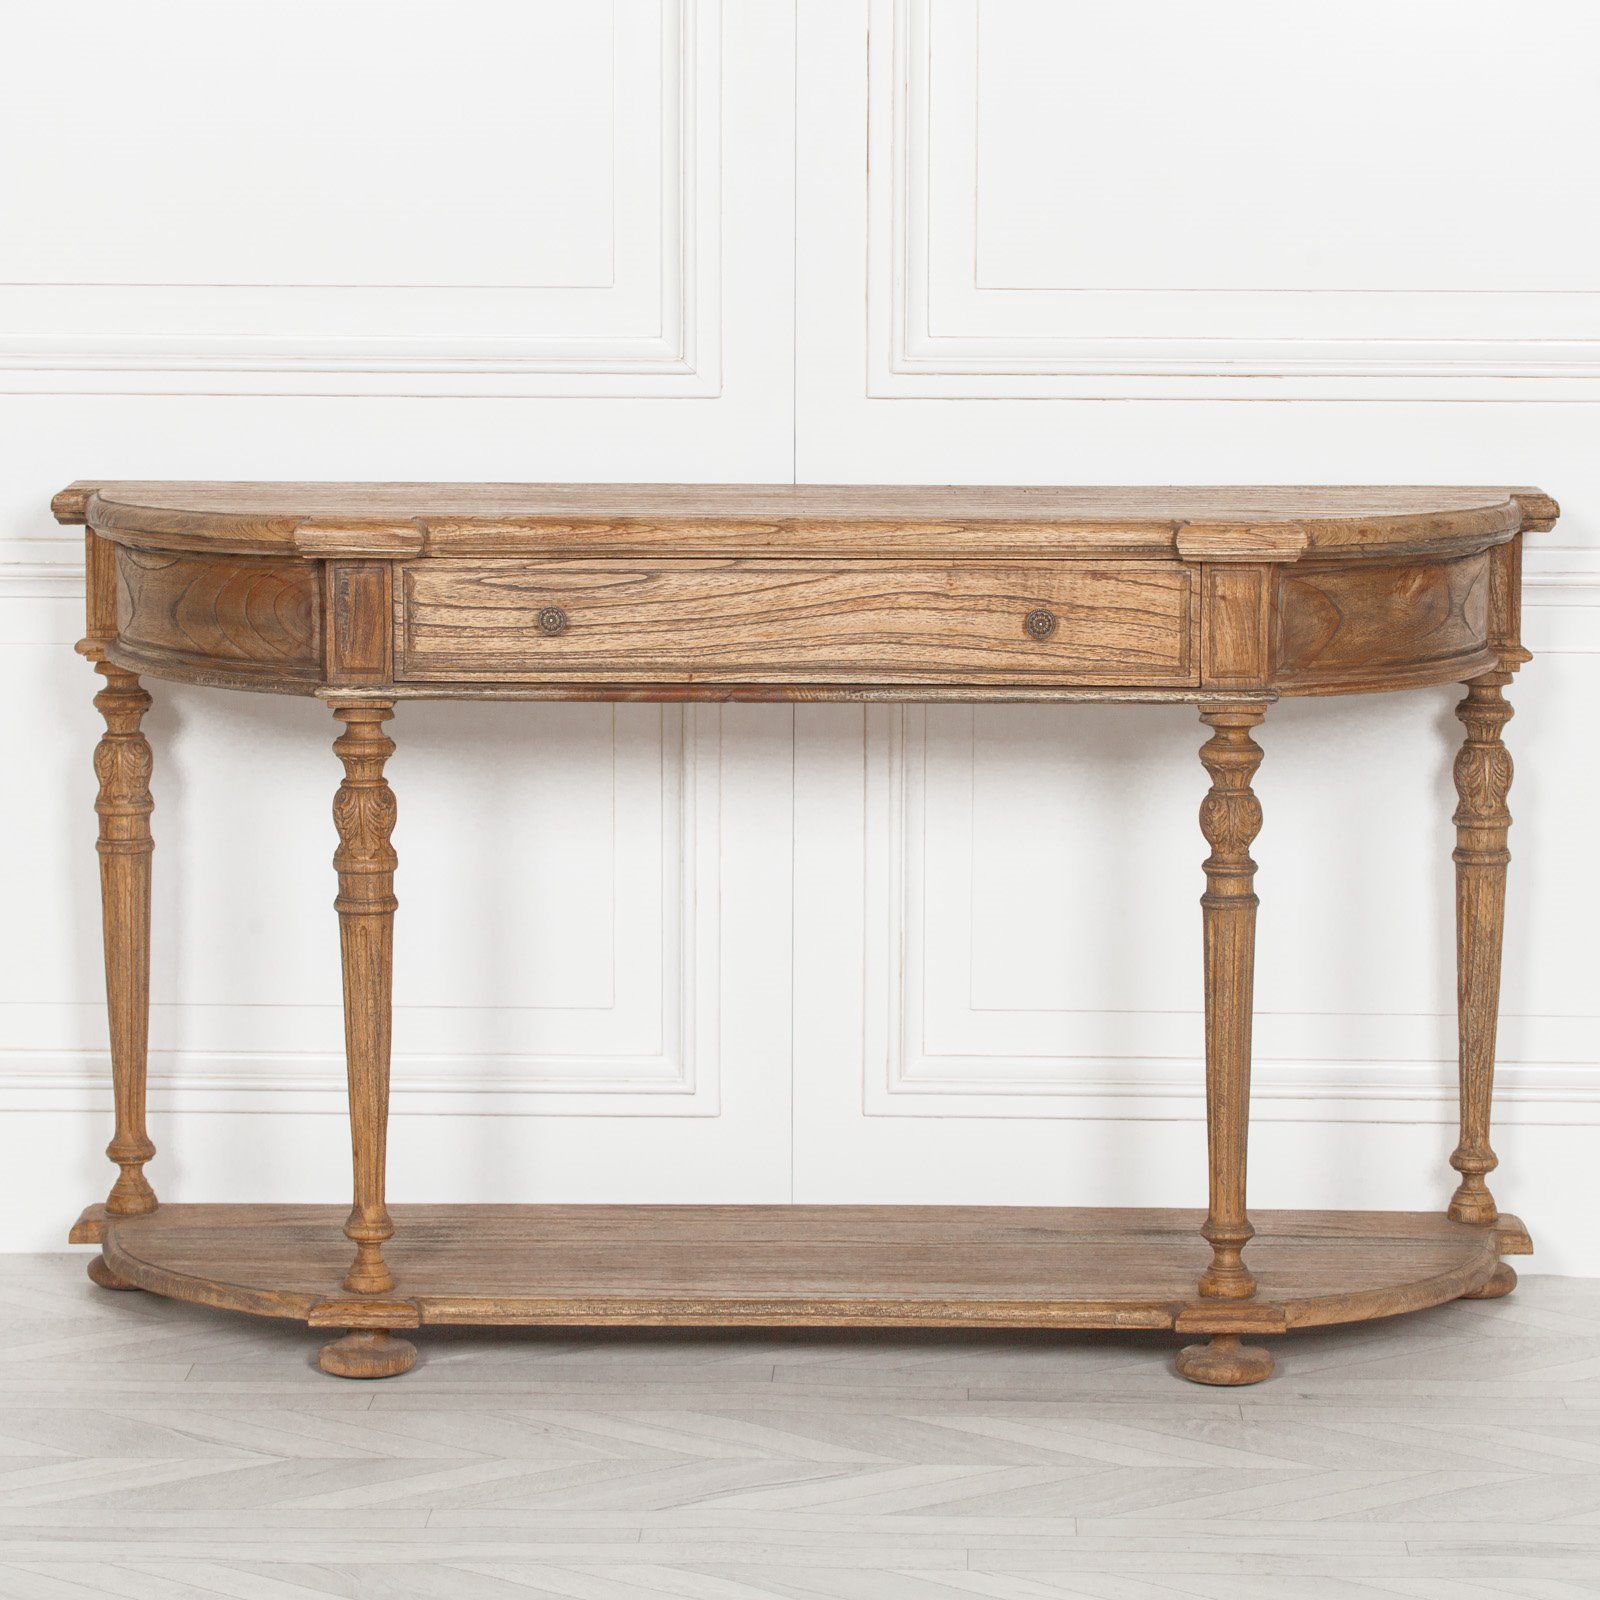 Vintage Cedar Wood Console Table With Wood Console Tables (View 13 of 20)